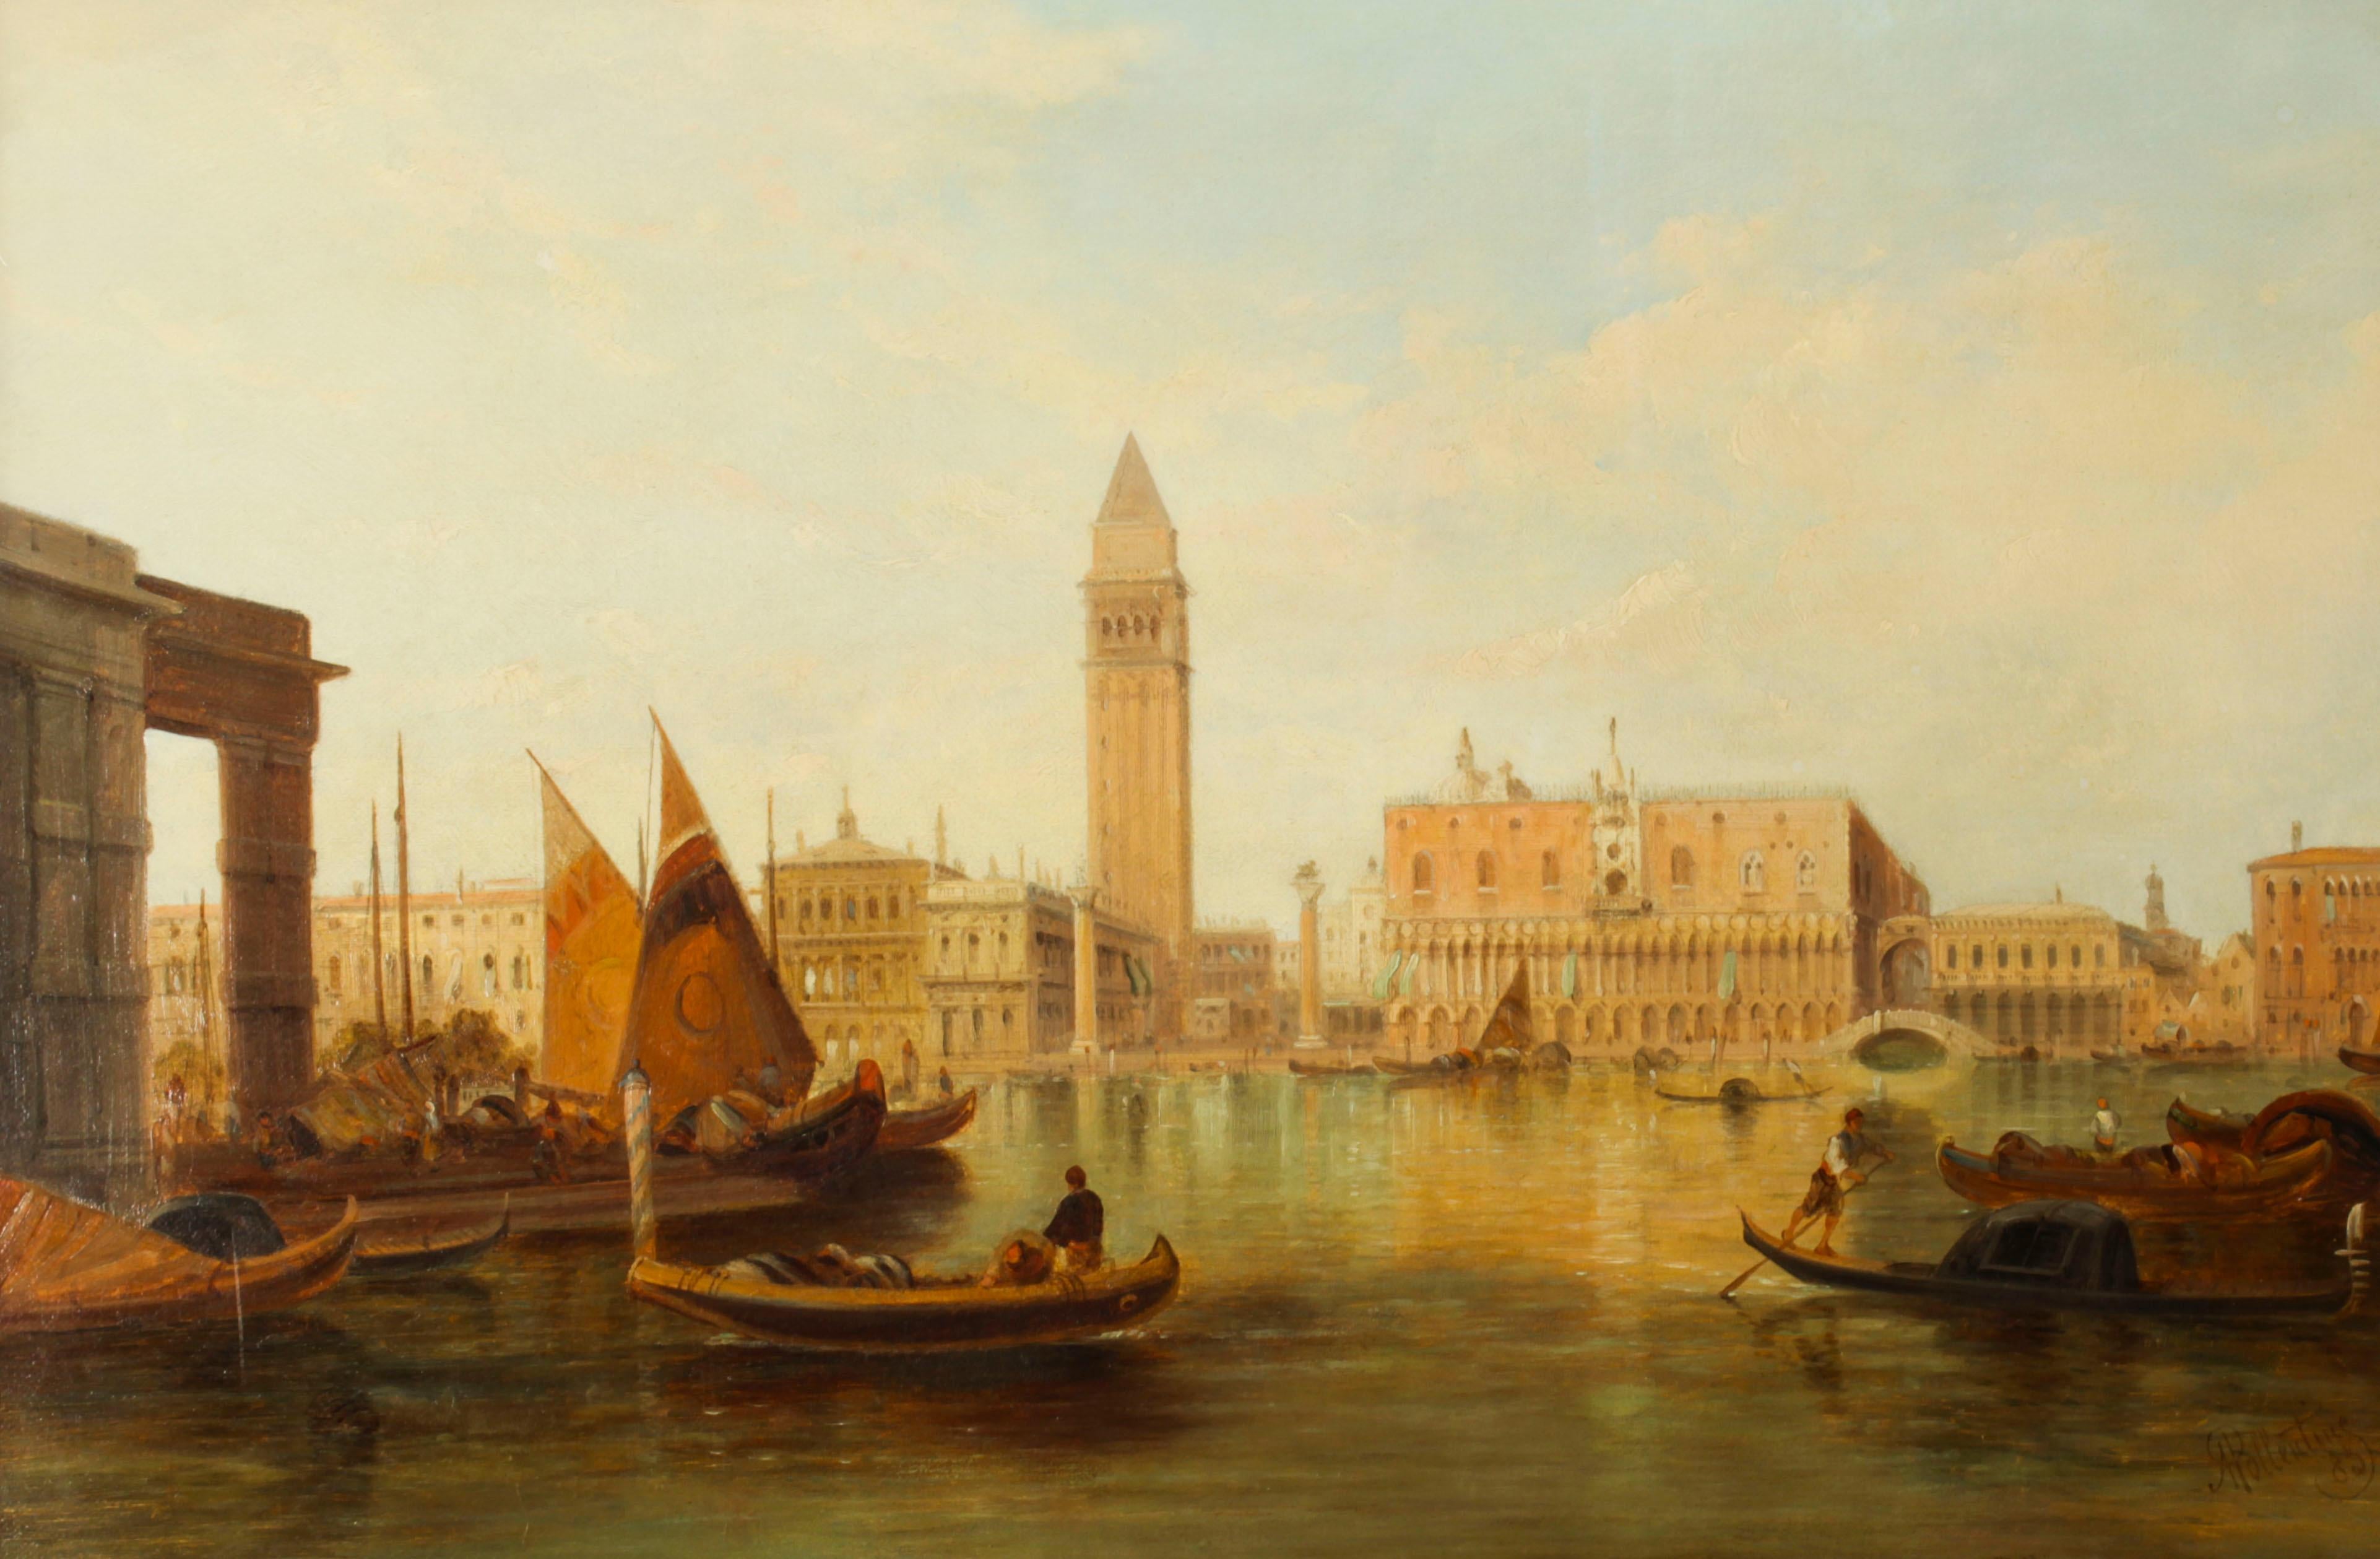 This is a beautiful oil on canvas painting of the view of the Ducal Palace and the entrance to the Piazza San Marco Canal in Venice by the renowned British artist Alfred Pollentine (1836-1890) and signed lower right 'A Pollentine/82.

This beautiful